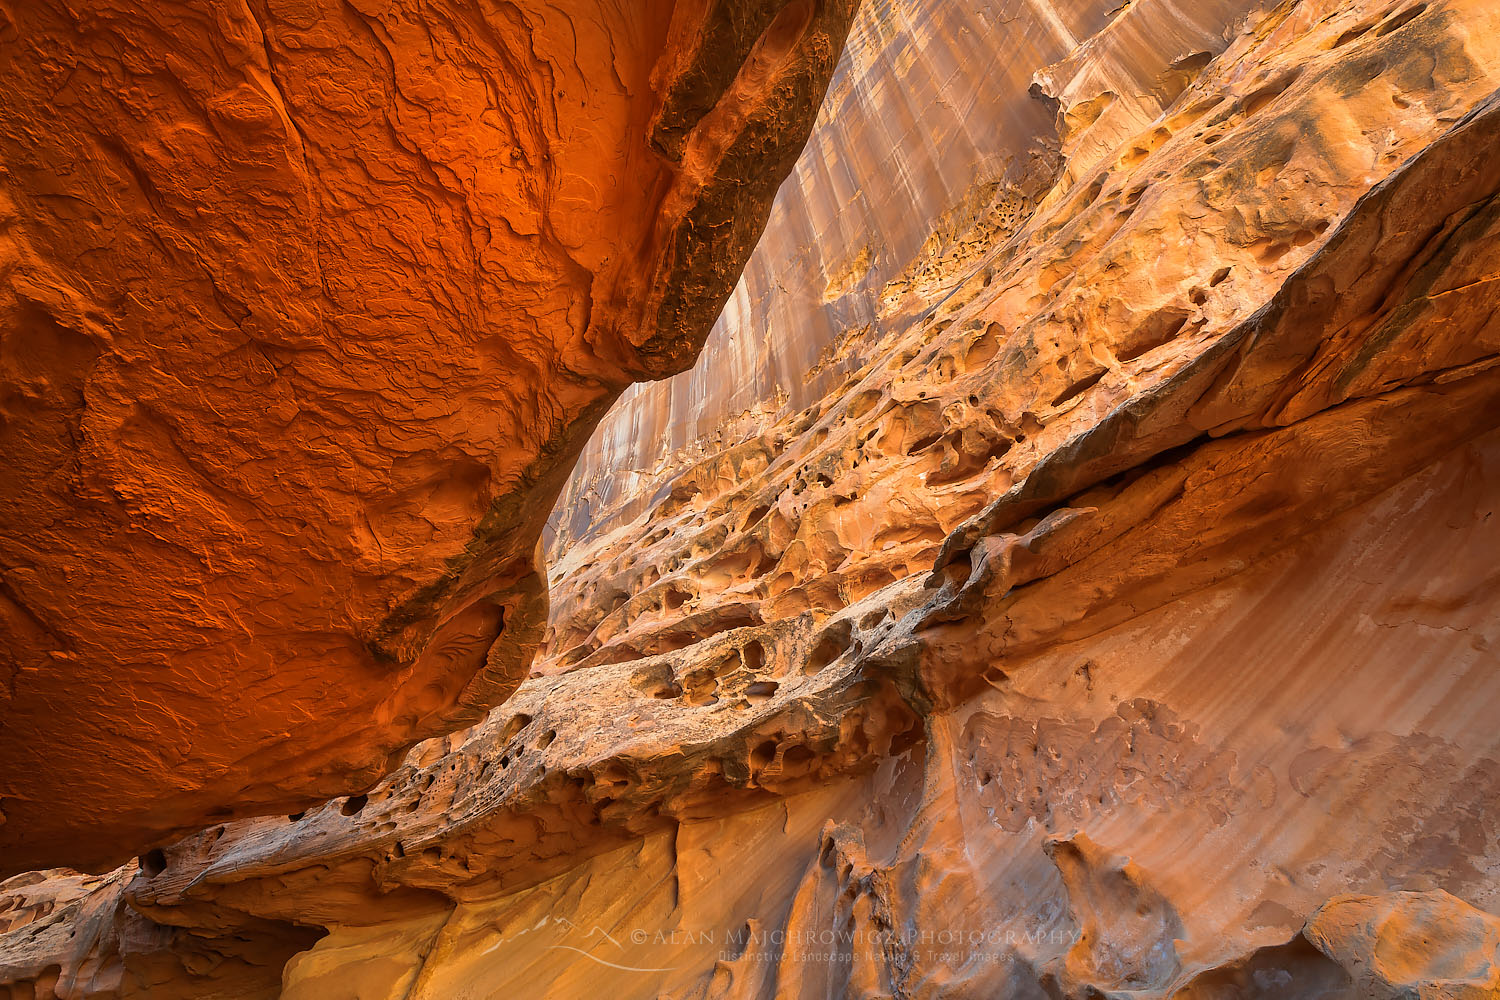 Eroded sandstone walls and overhangs resembling Swiss Cheese in the"subway" slot portion of Crack Canyon San Rafael Reef Southern Utah Photography Tips